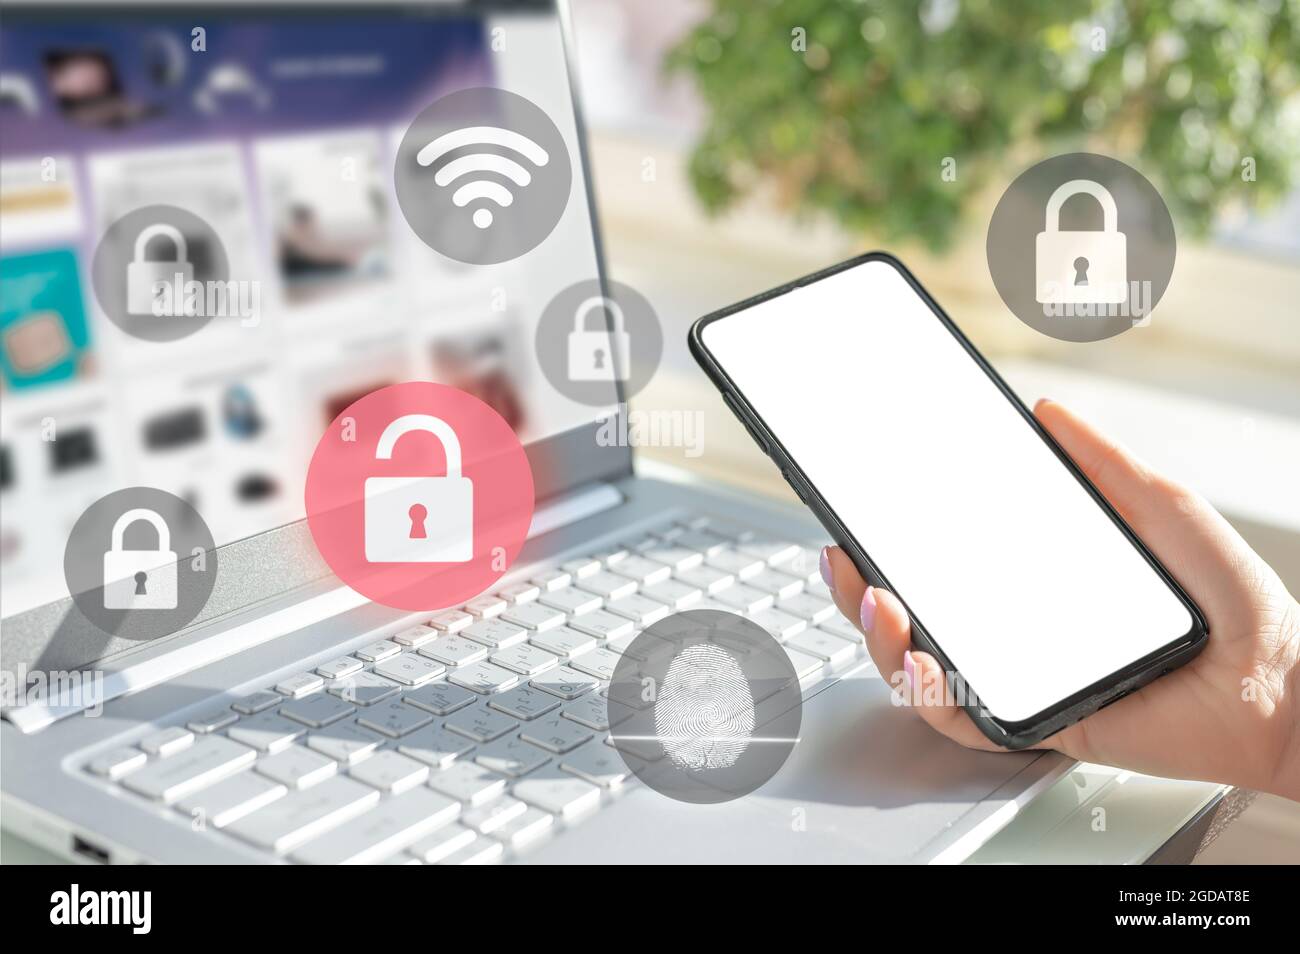 mockup cellphone. businesswoman hold cell phone. woman logging in laptop and holding smartphone on hand with security key lock icon on screen. Privacy Stock Photo